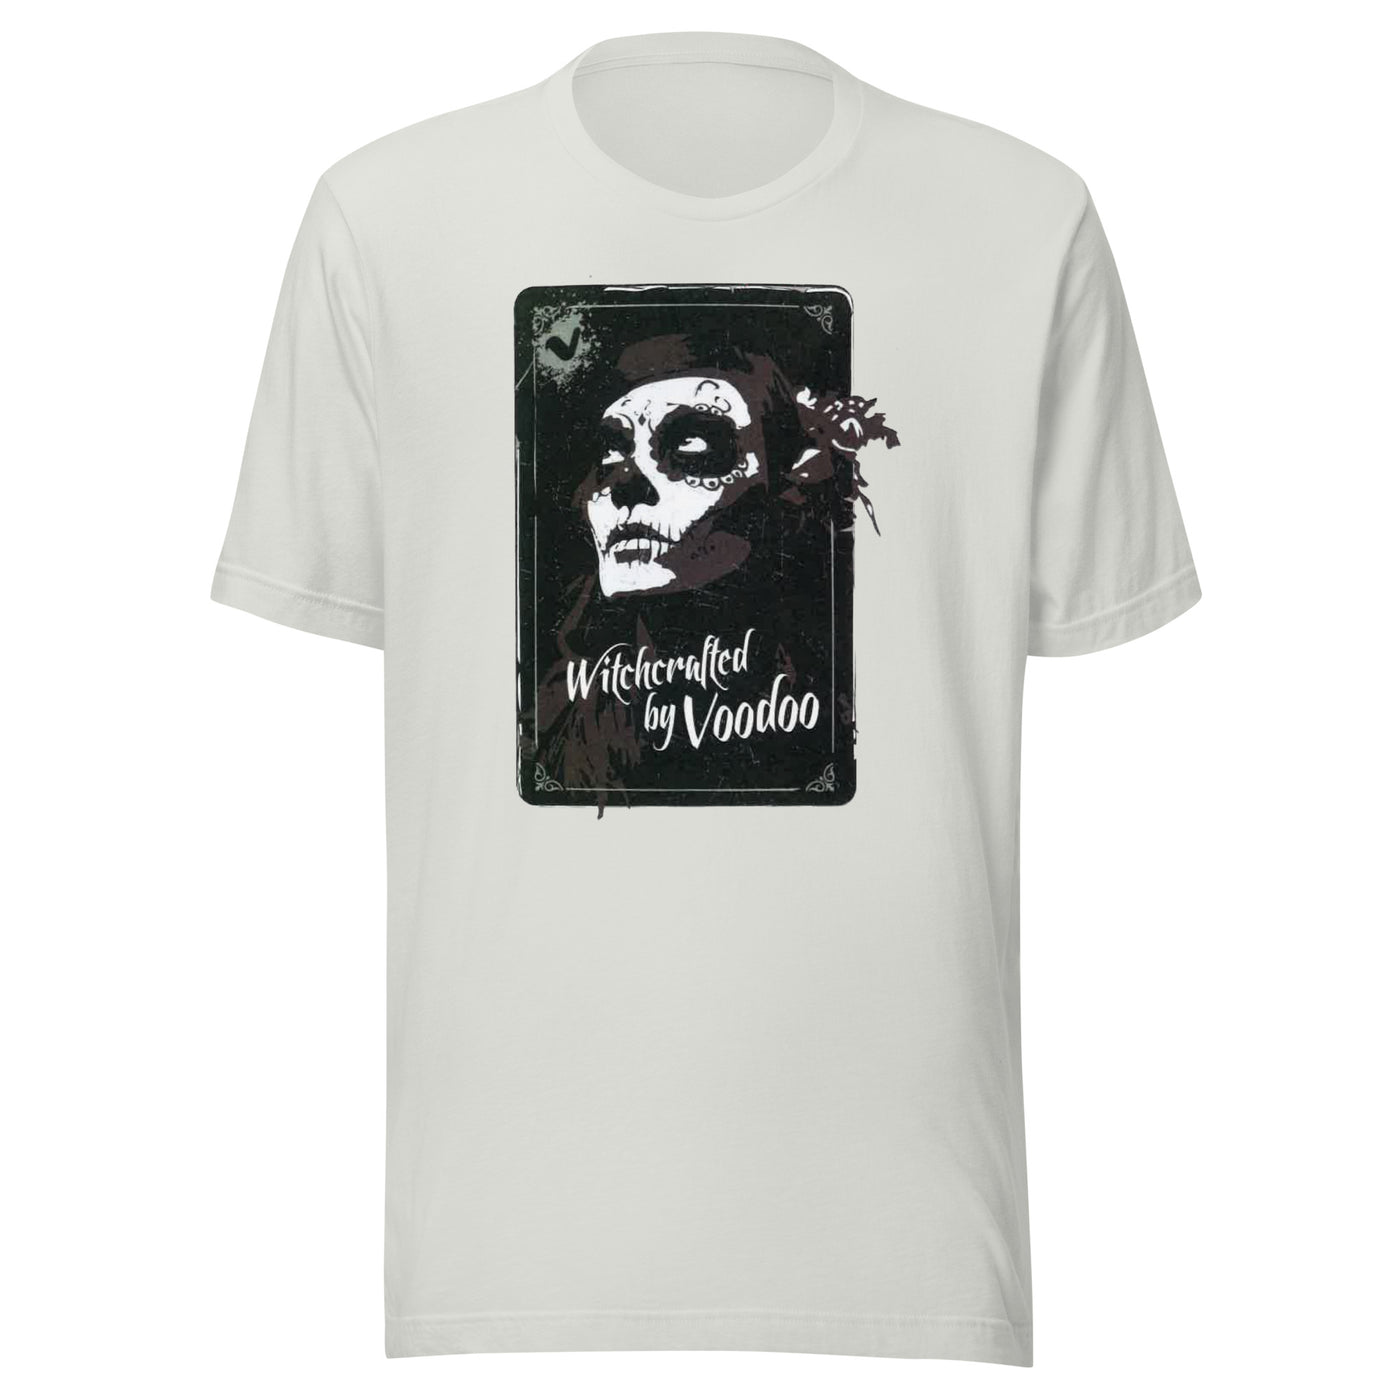 Unisex Witchcrafted By Voodoo t-shirt - VOODOO COFFEE COMPANY